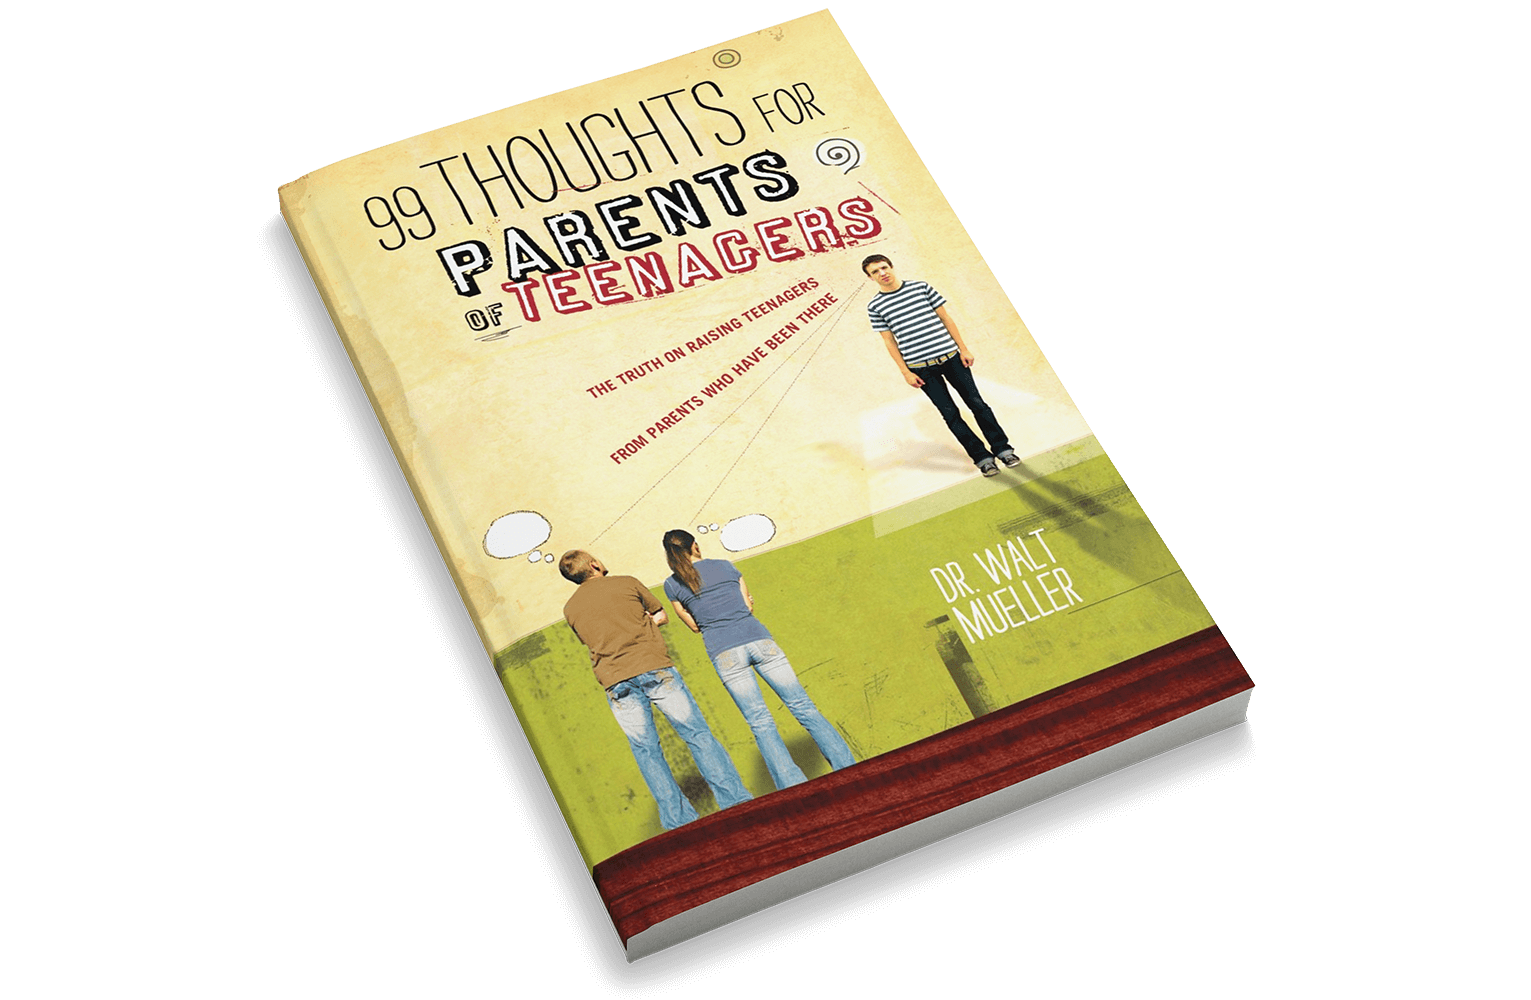 99 Thoughts for Parents of Teenagers